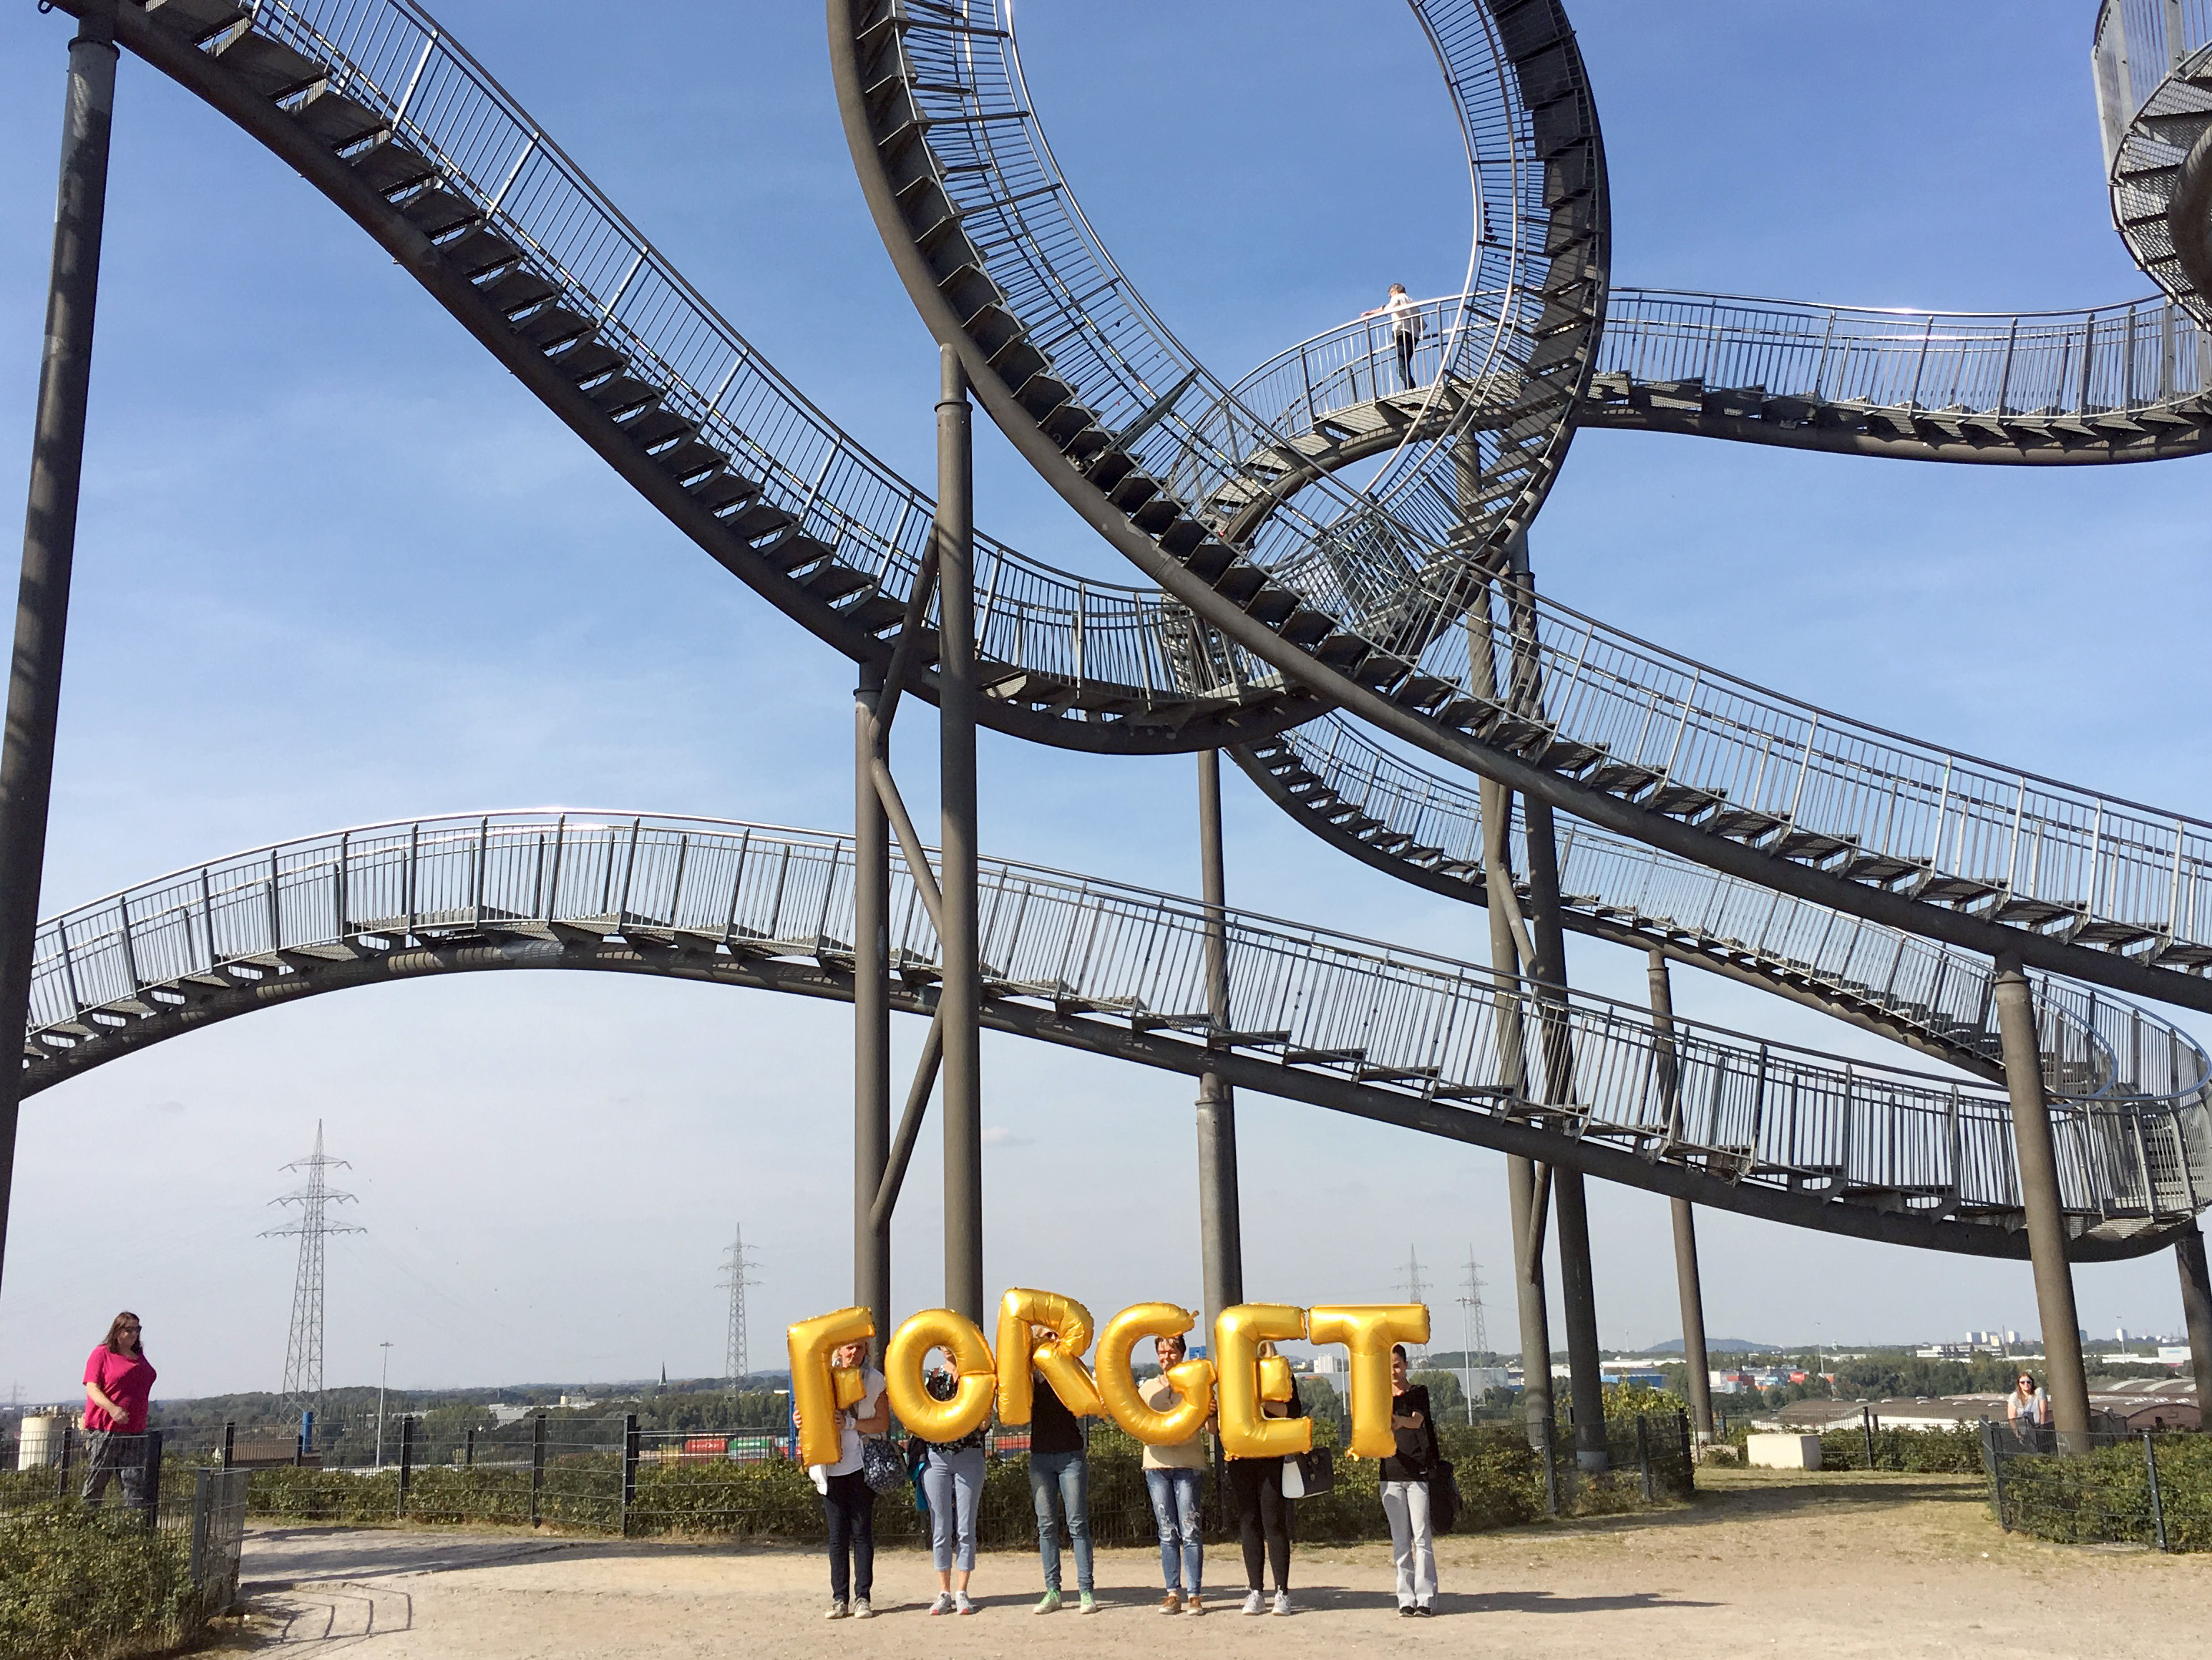 Germany, Duisburg, Tiger & Turtle - Magic Mountain - Forget, Silence Was Golden, golden balloons